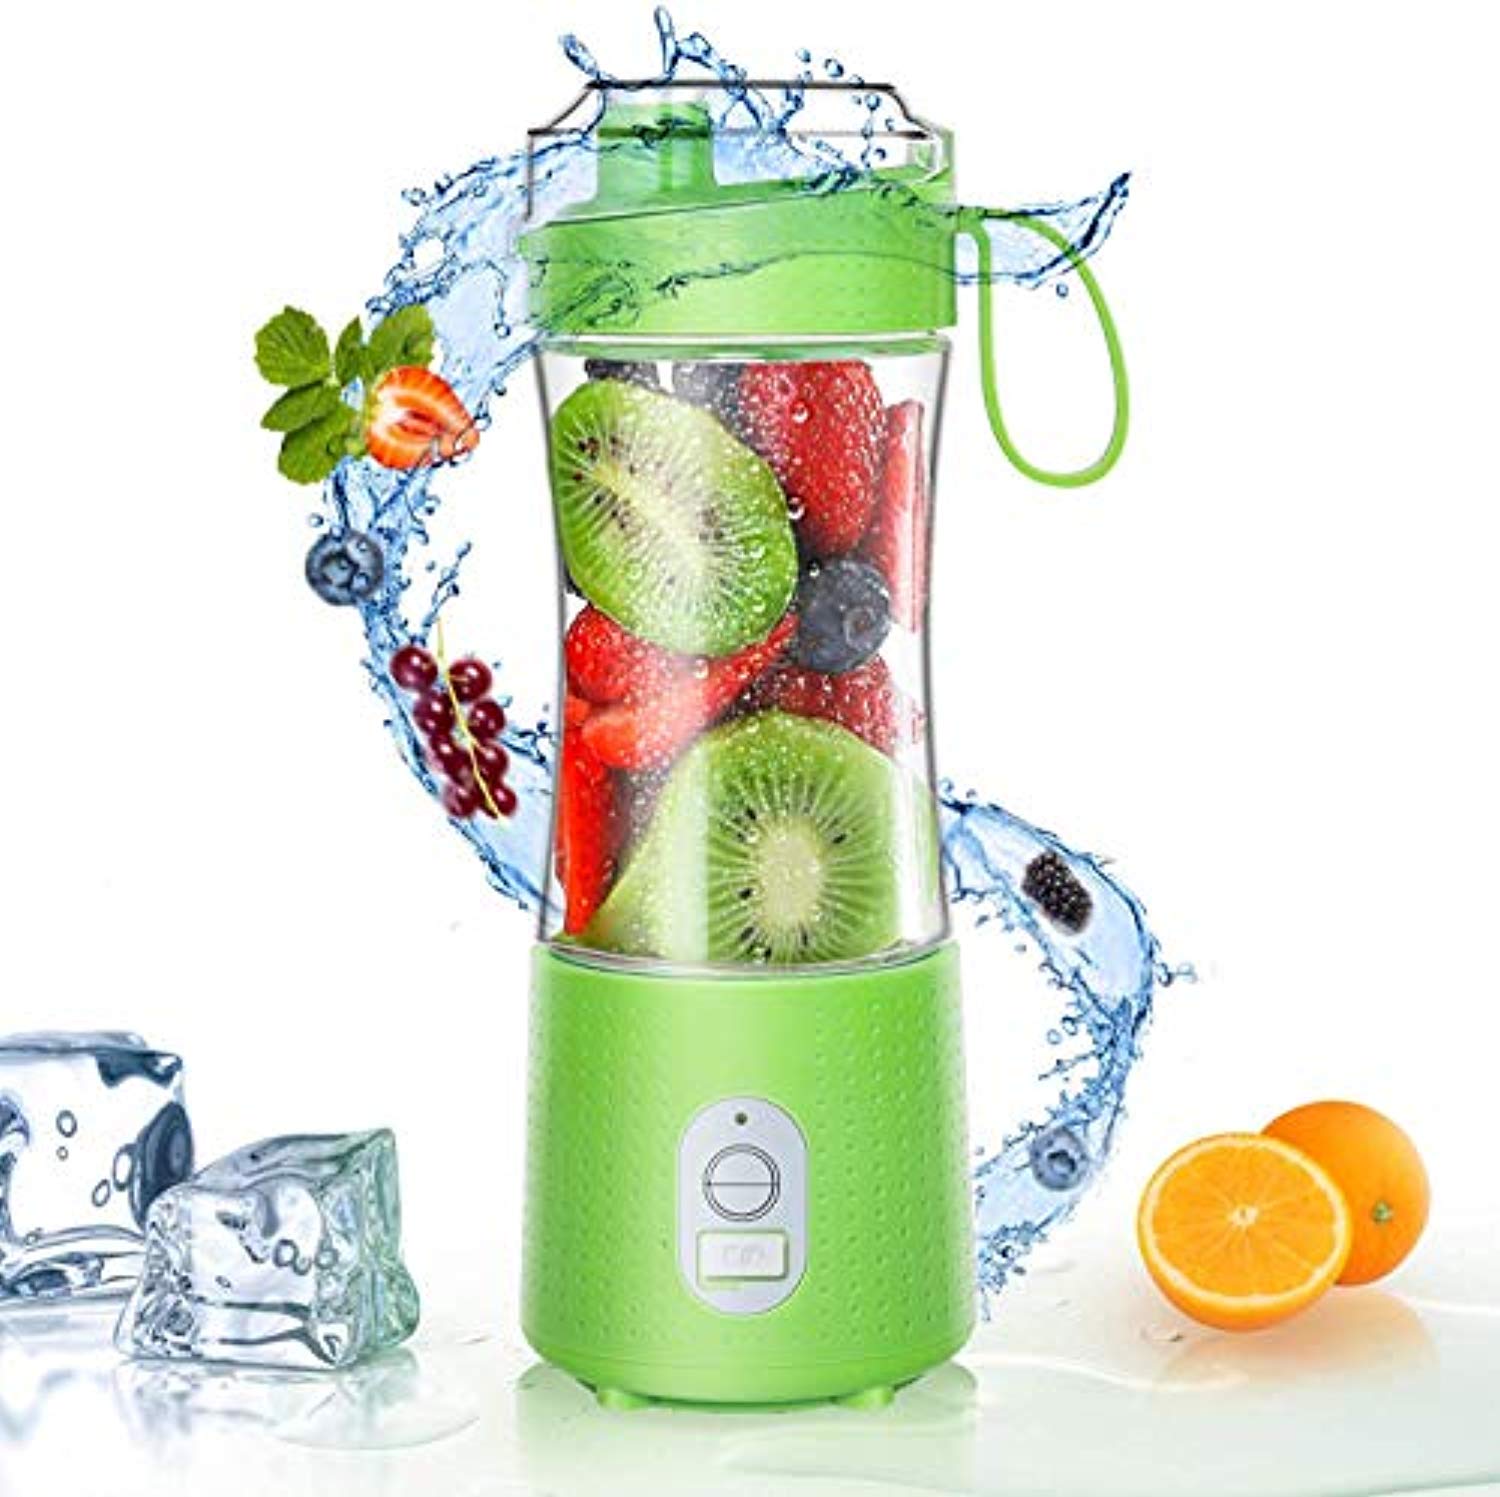 A Portable Blender Can Make Your Life Much Easier - Holiday and Travel